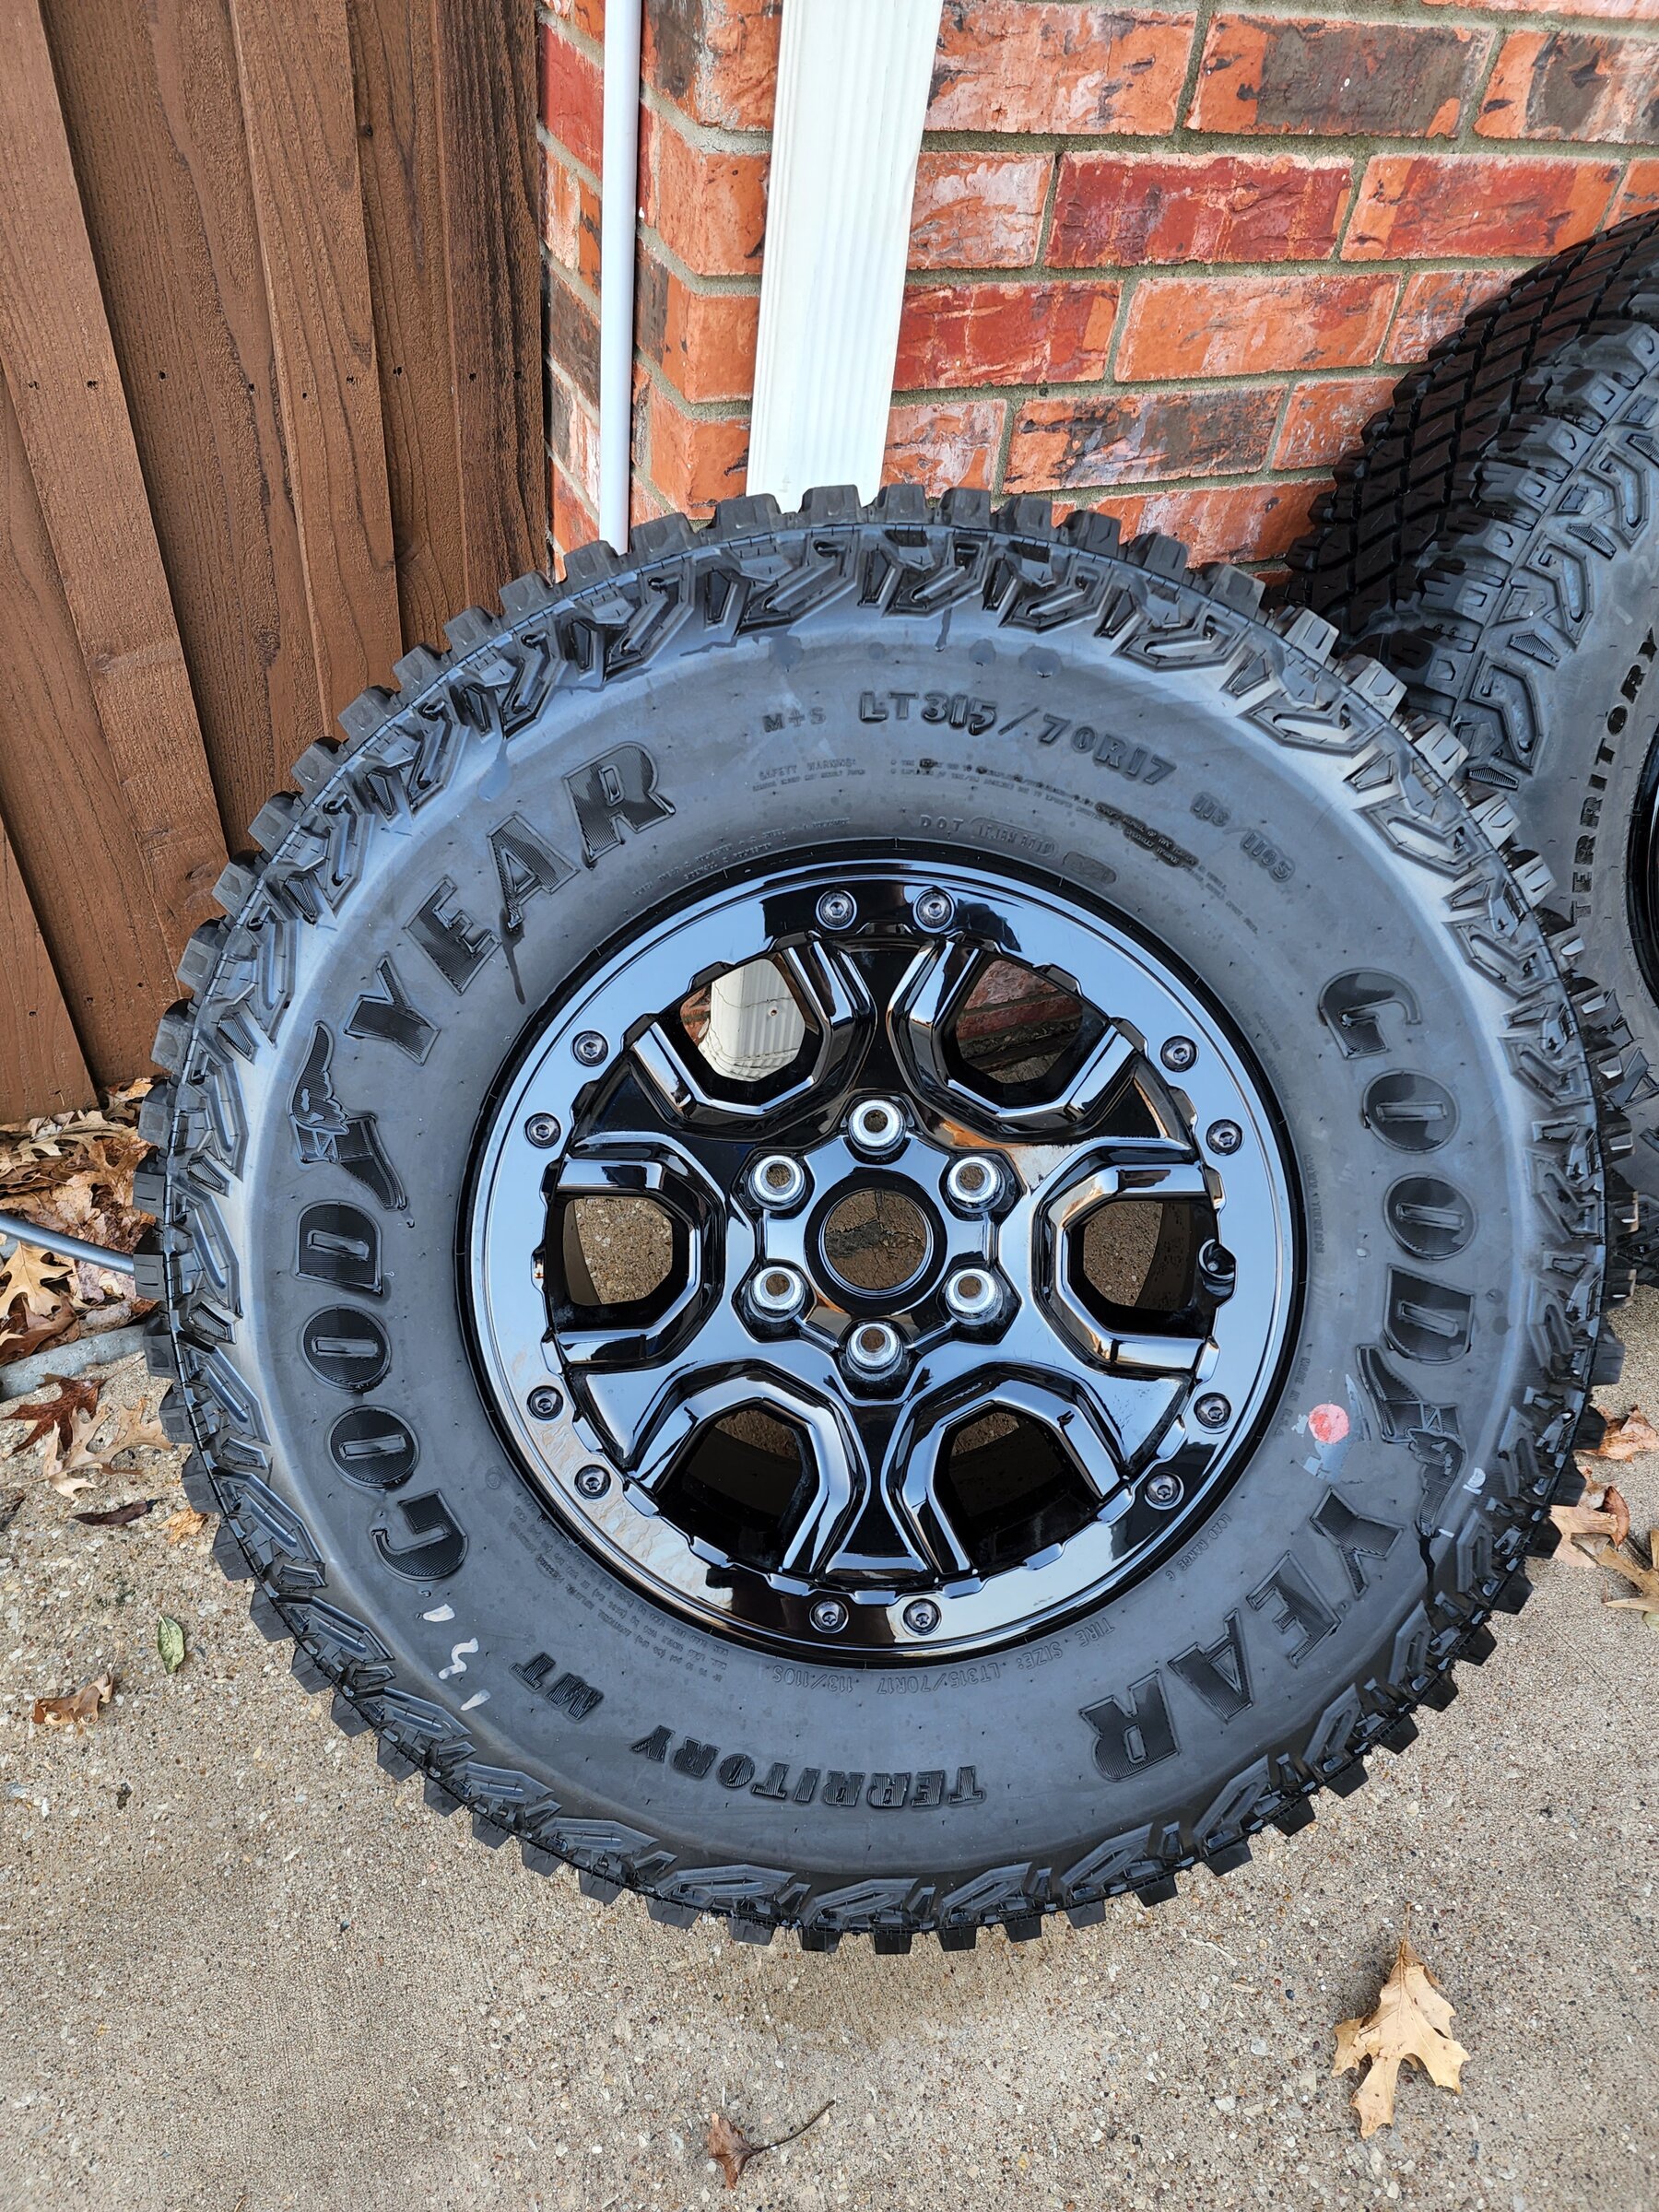 Ford Bronco 5 Black Beadlock Capable Wheels with GoodYear Territory M/T's $old- Dallas 20220305_172220